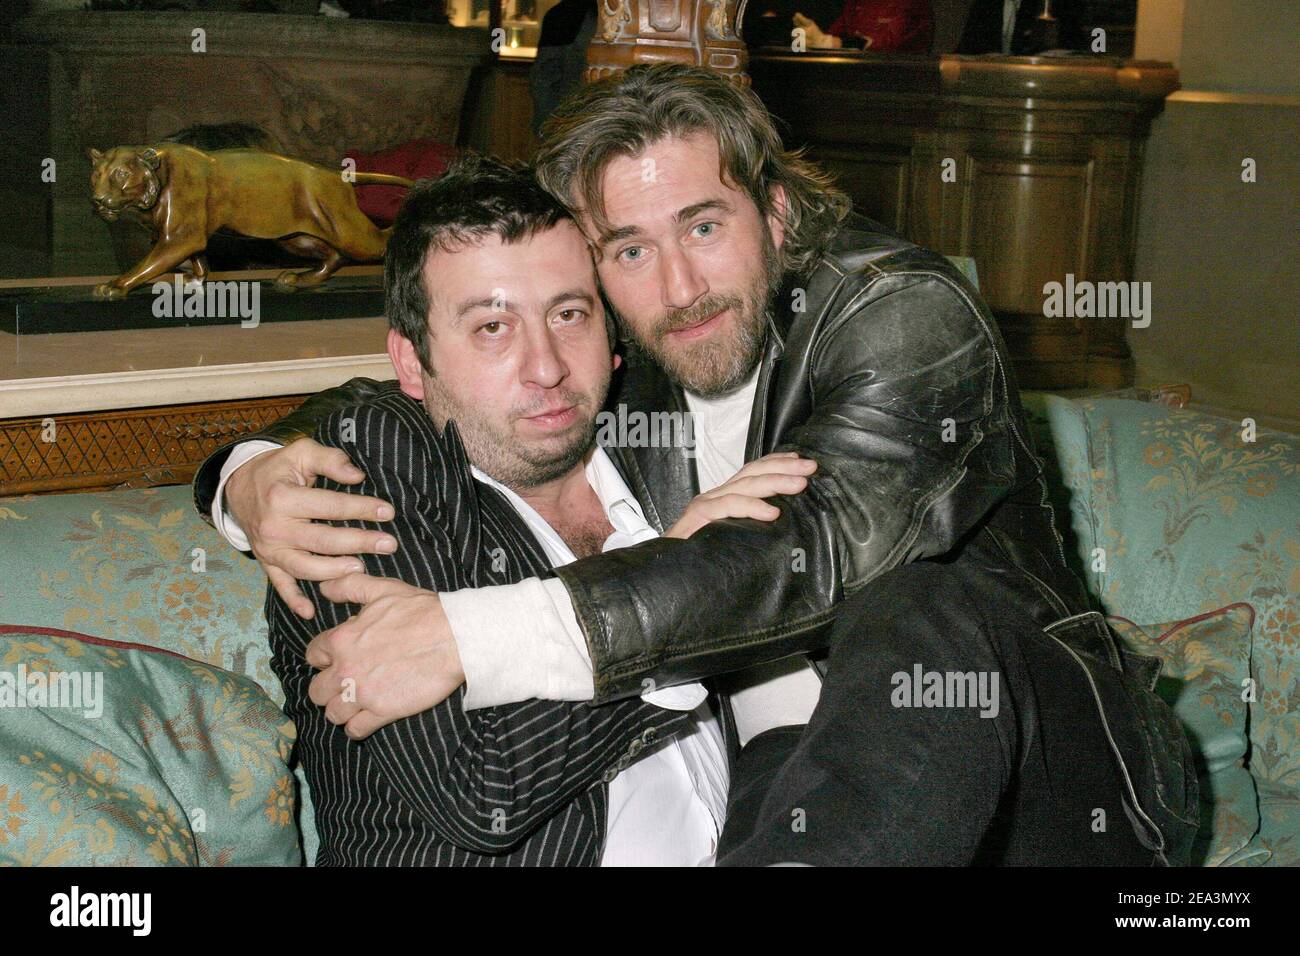 Canadian actor Roy Dupuis and French actor Michel Muller pose for there movie 'C'est pas moi !... c'est l'autre' at the hotel Marriot in Paris, France on April 03, 2005. Photo by Benoit Pinguet/ABACA. Stock Photo